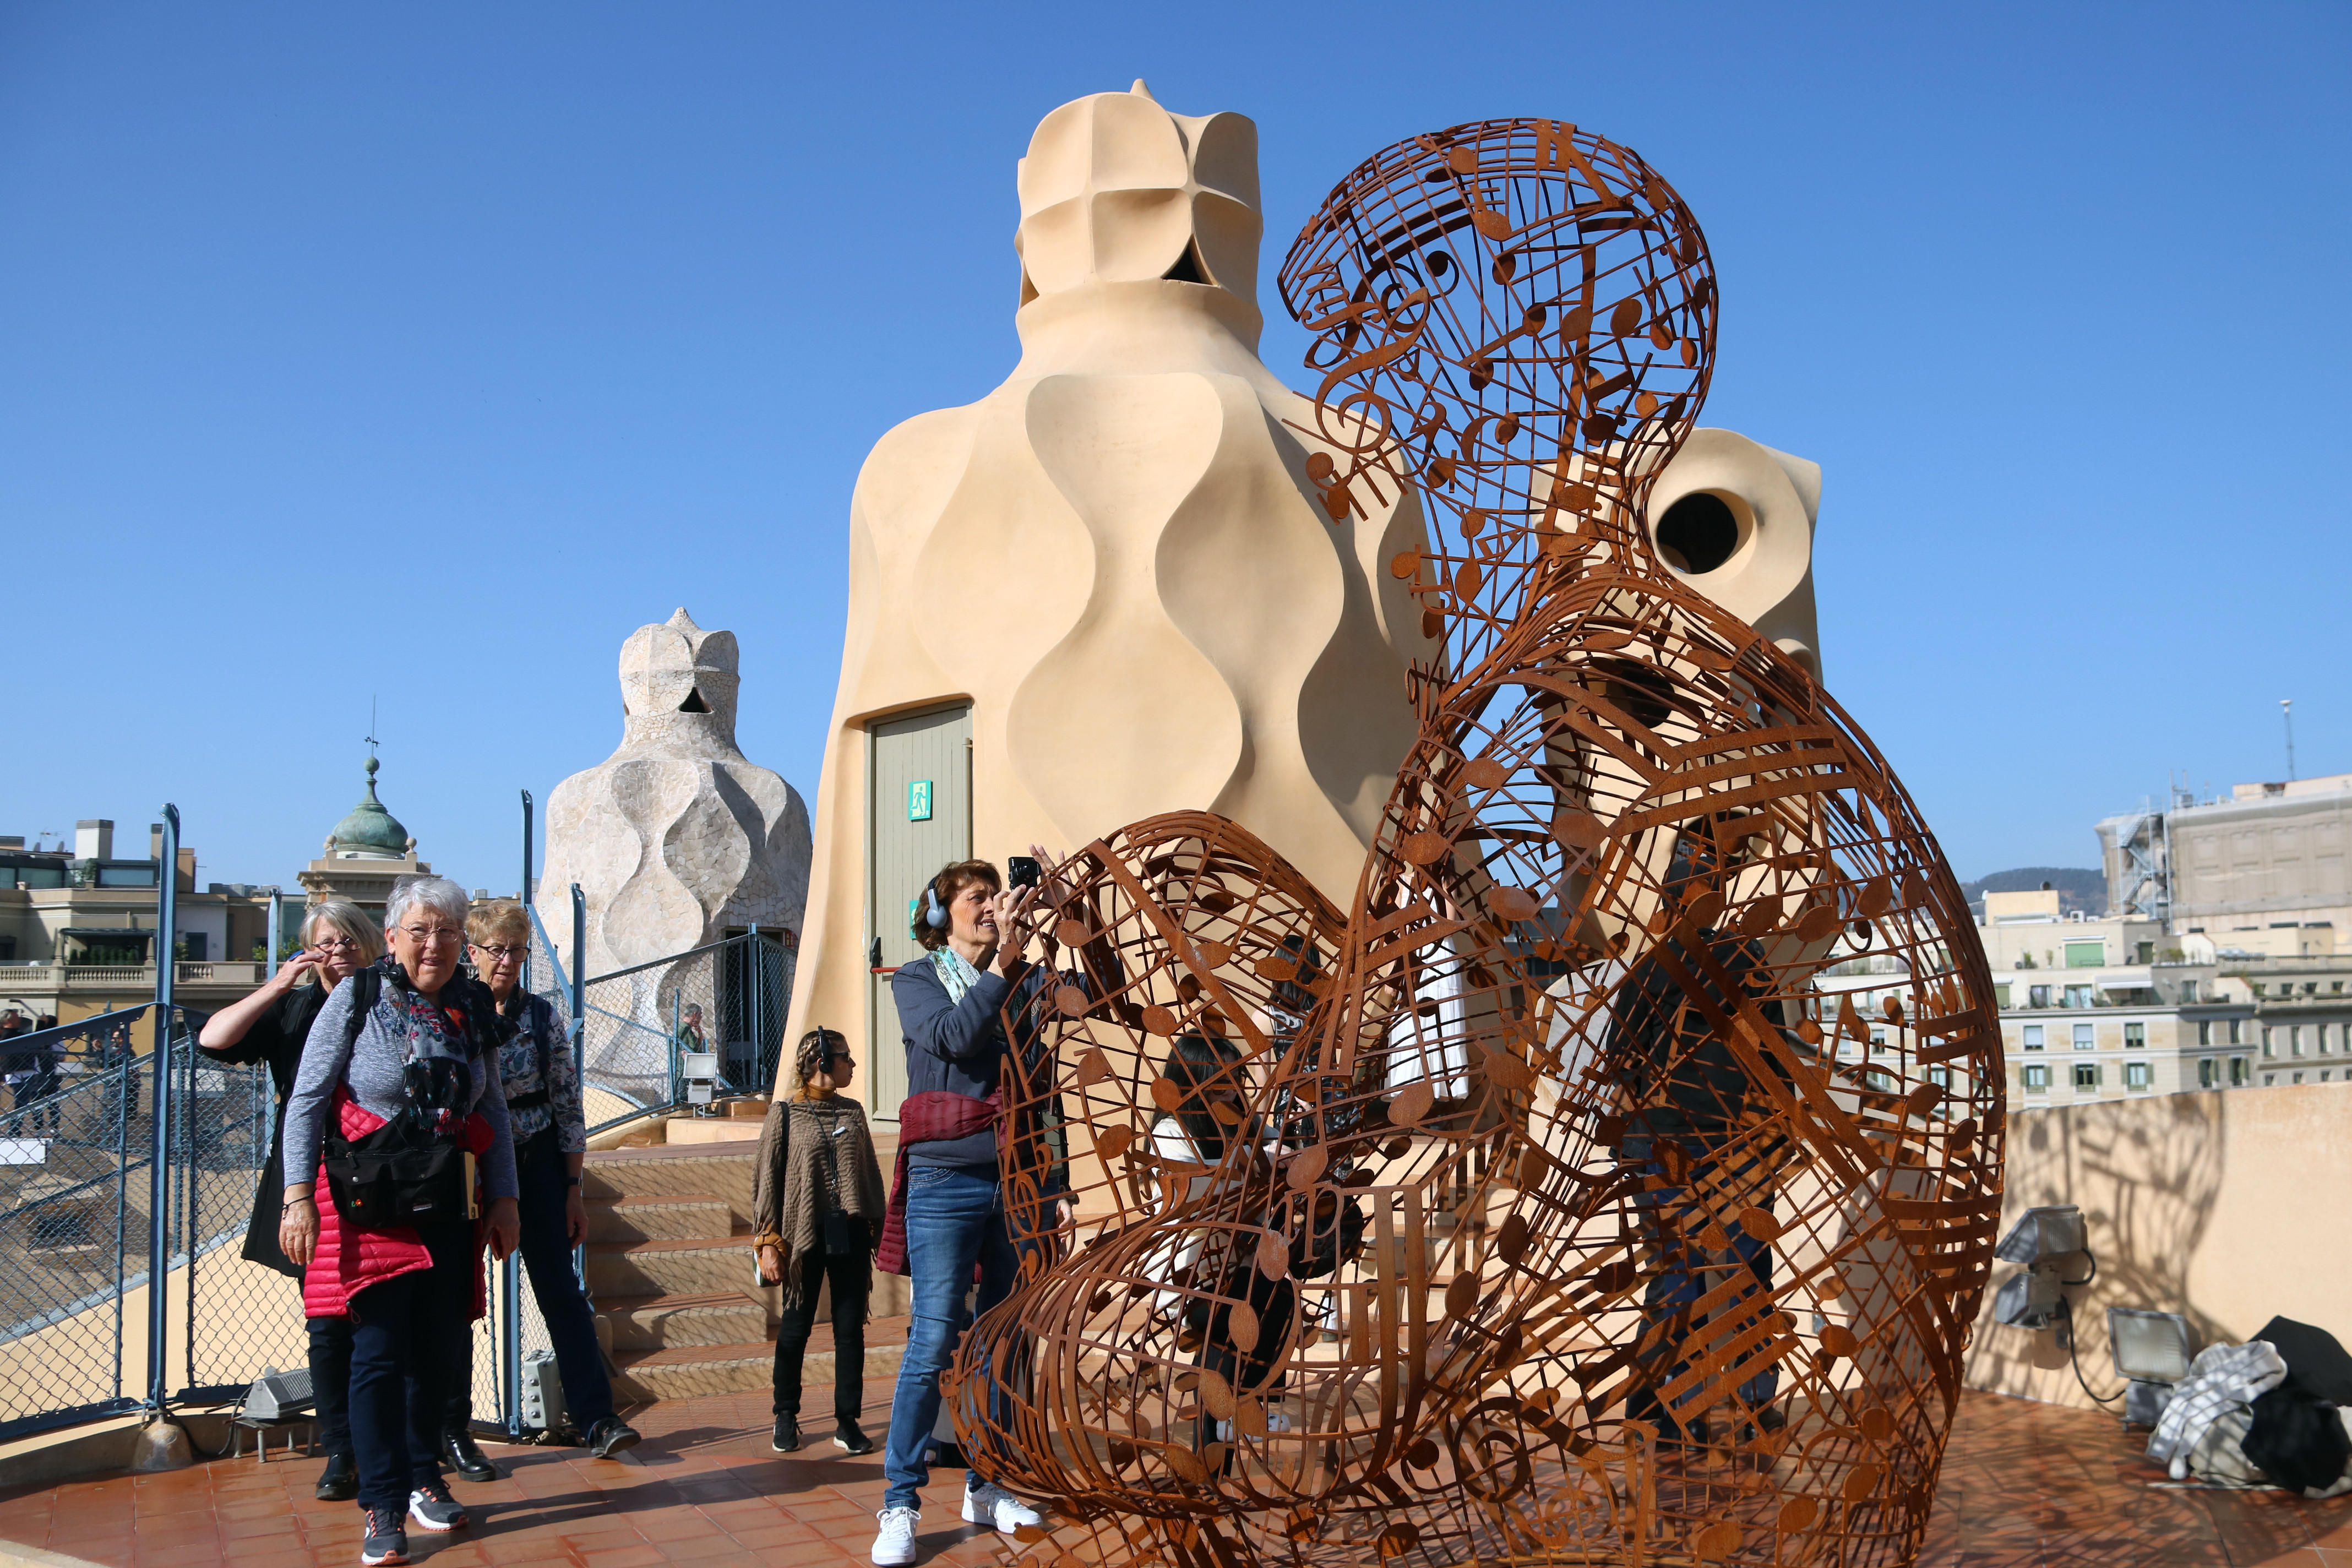 One of the many sculptures made by Jaume Plensa exhibited in the rooftop of 'La Pedrera'